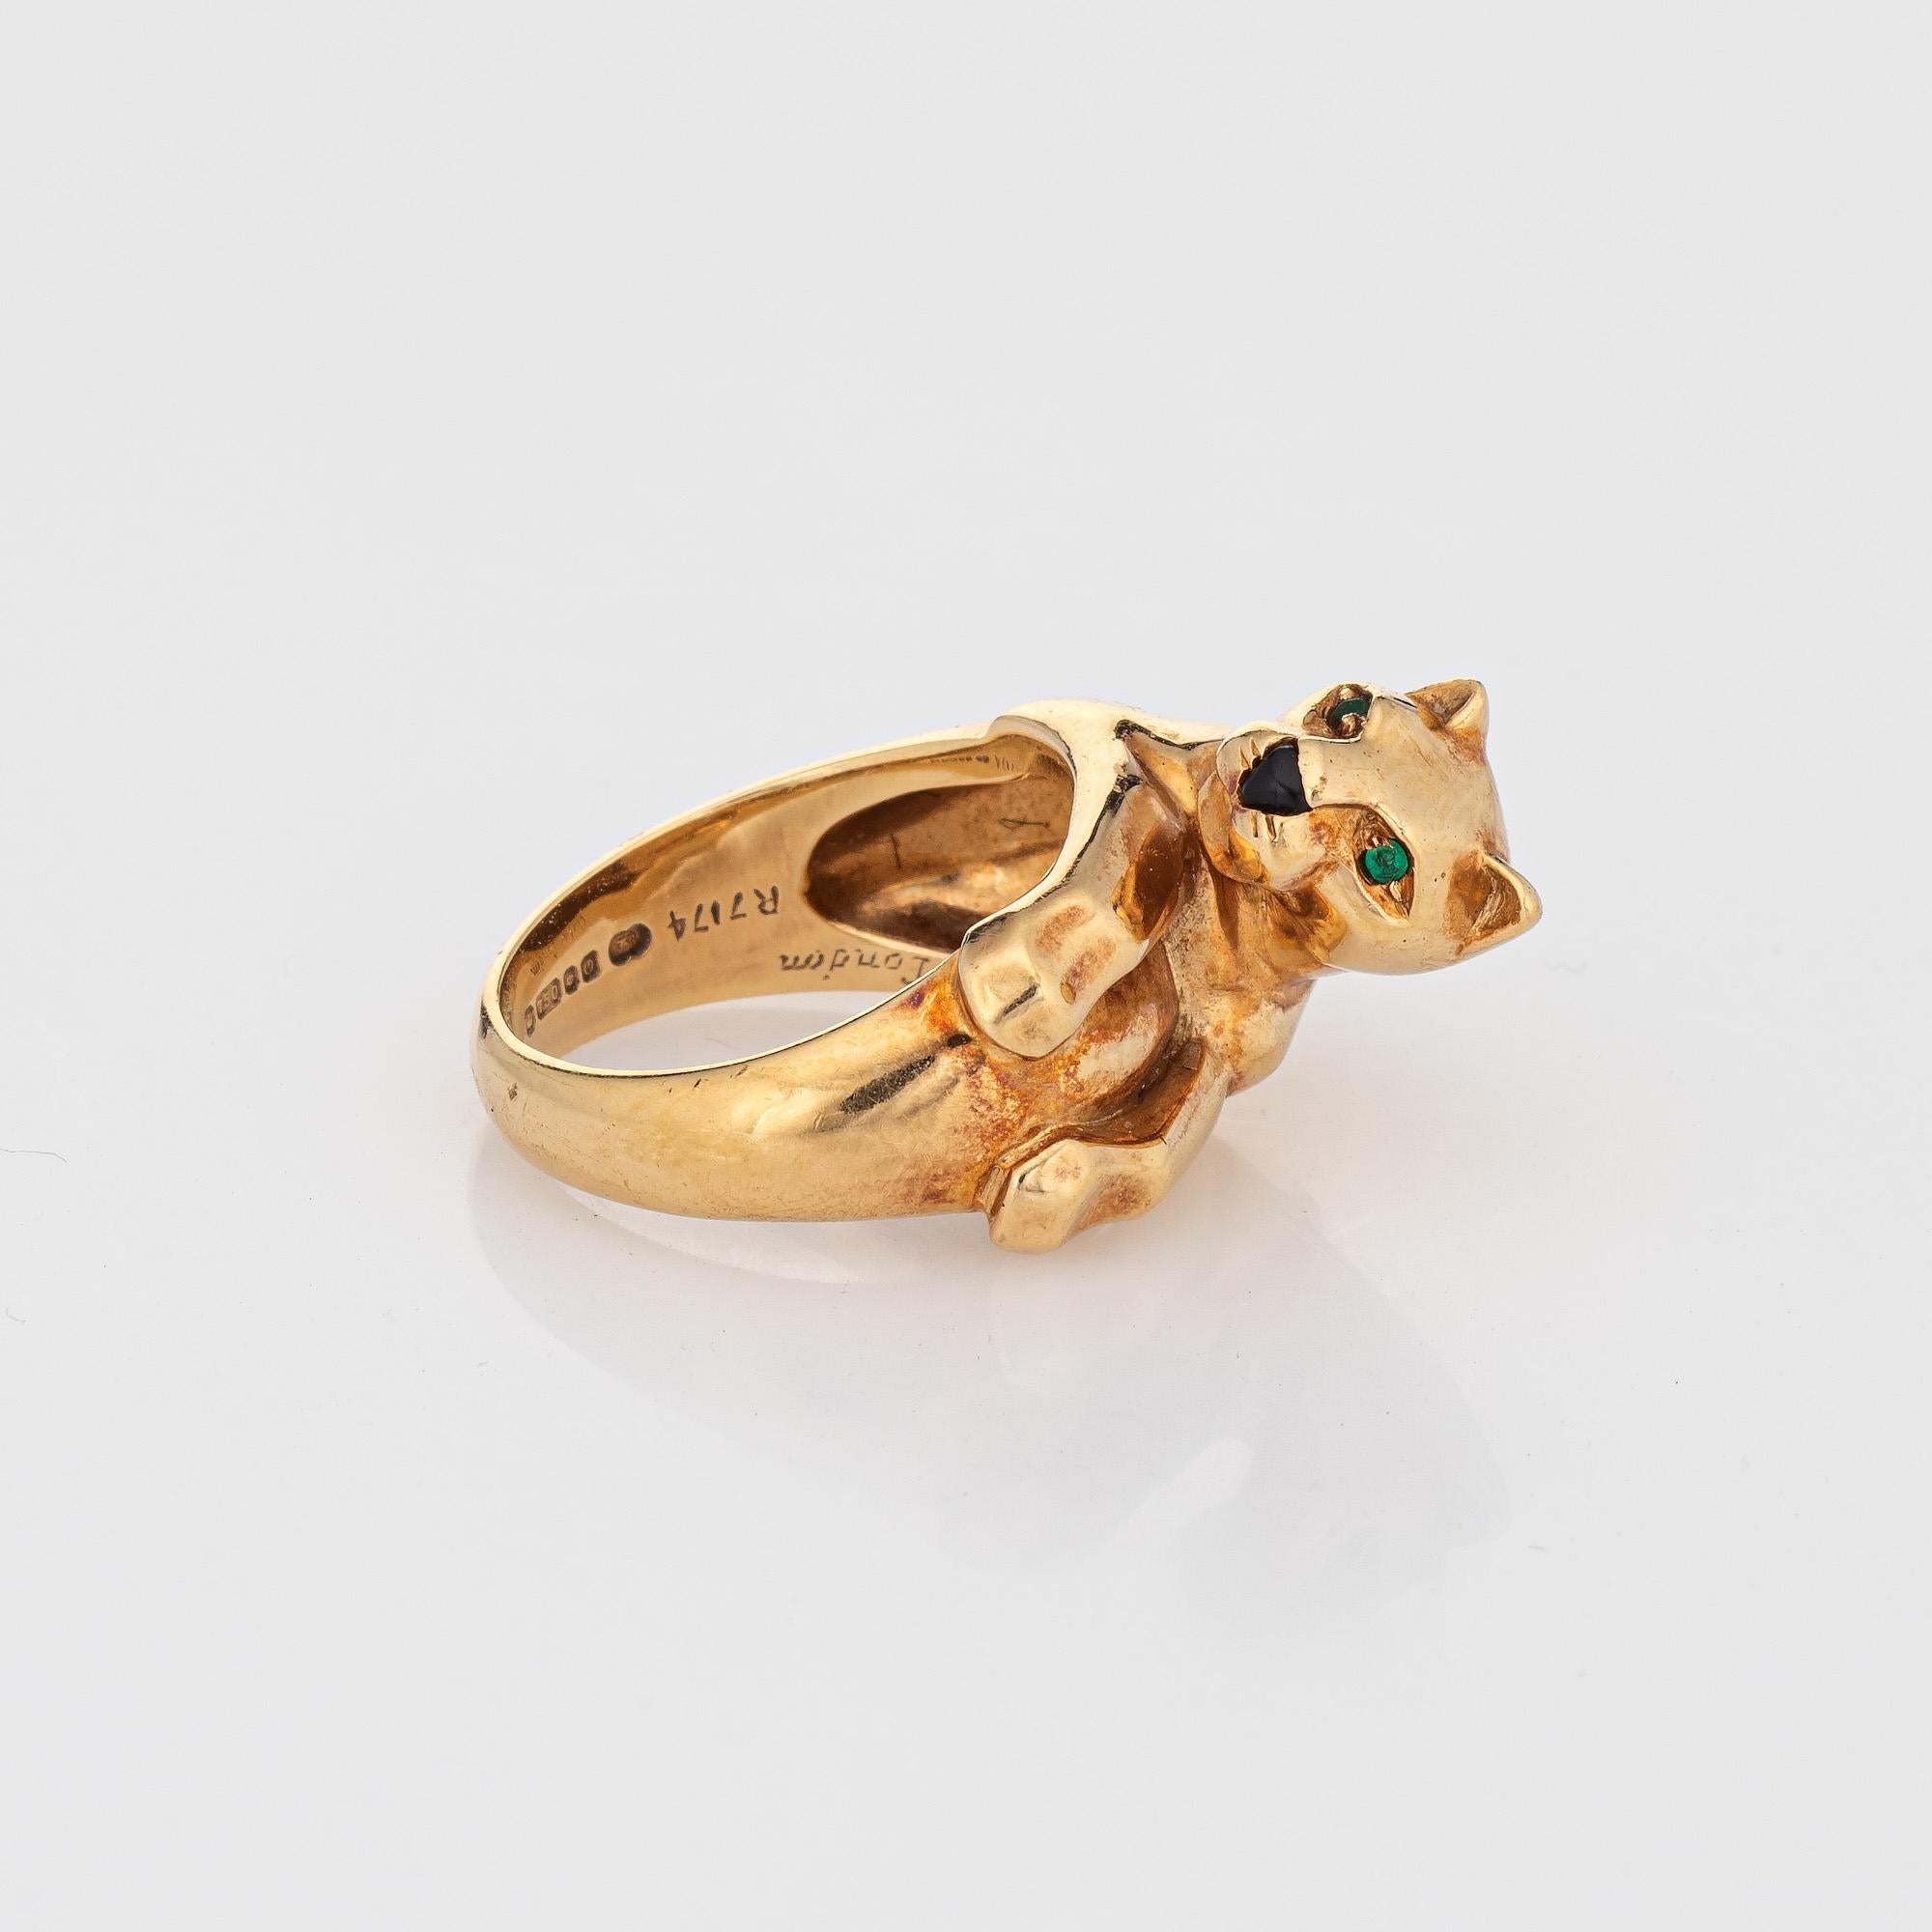 Vintage Cartier Panthere ring crafted in 18 karat yellow gold (circa 1988).  

Two estimated 0.02 carat emeralds are set into the eye, with a 2mm piece of onyx set into the nose.

The vintage Cartier Panthere ring was made by the Cartier London